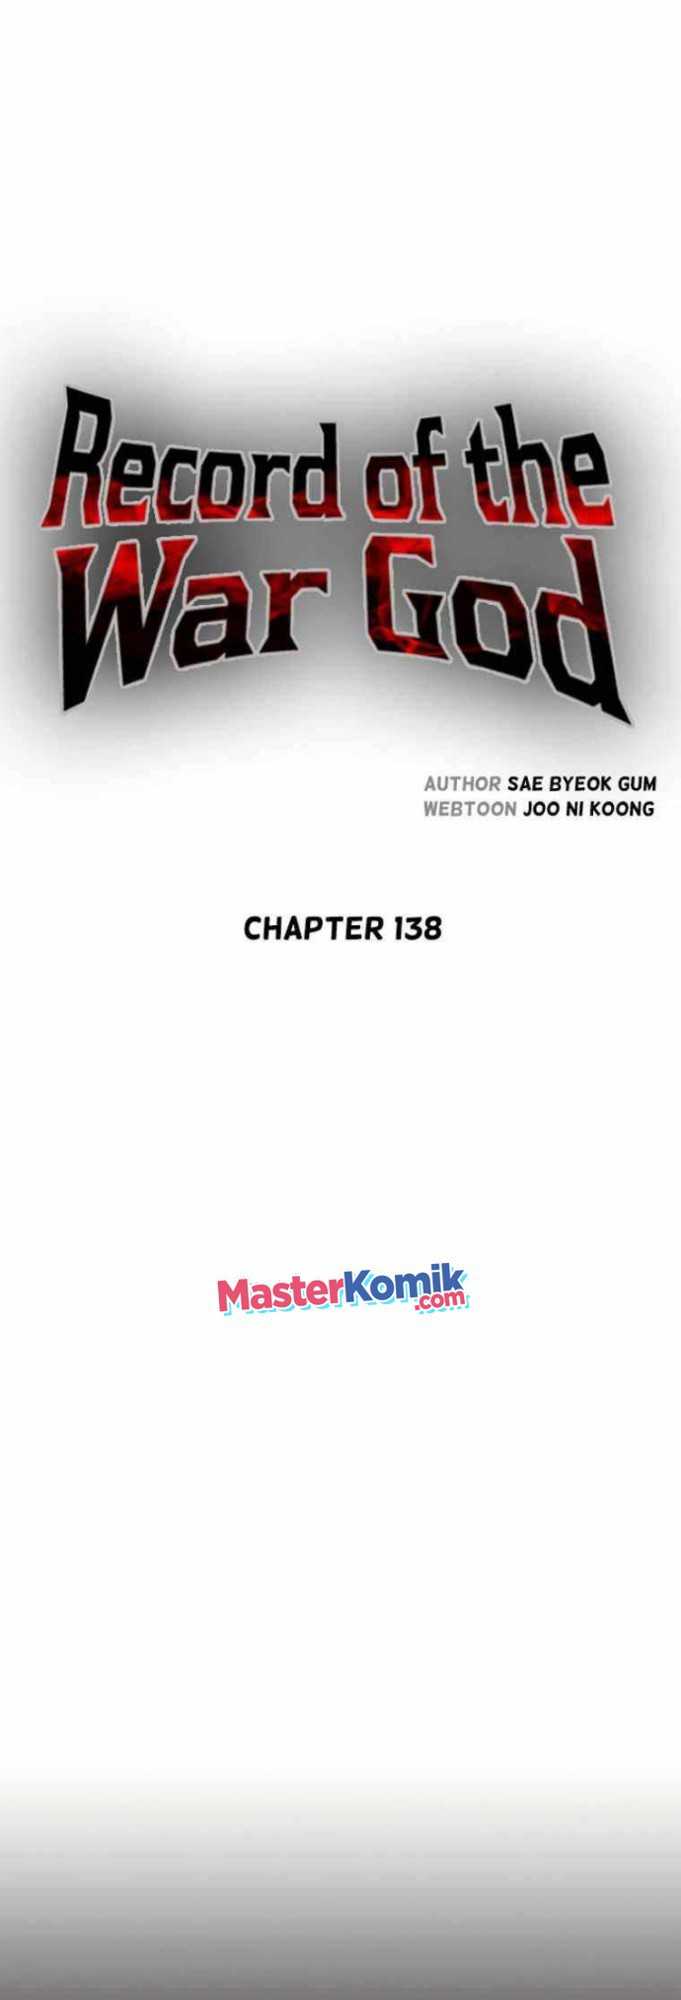 Record of the War God Chapter 138